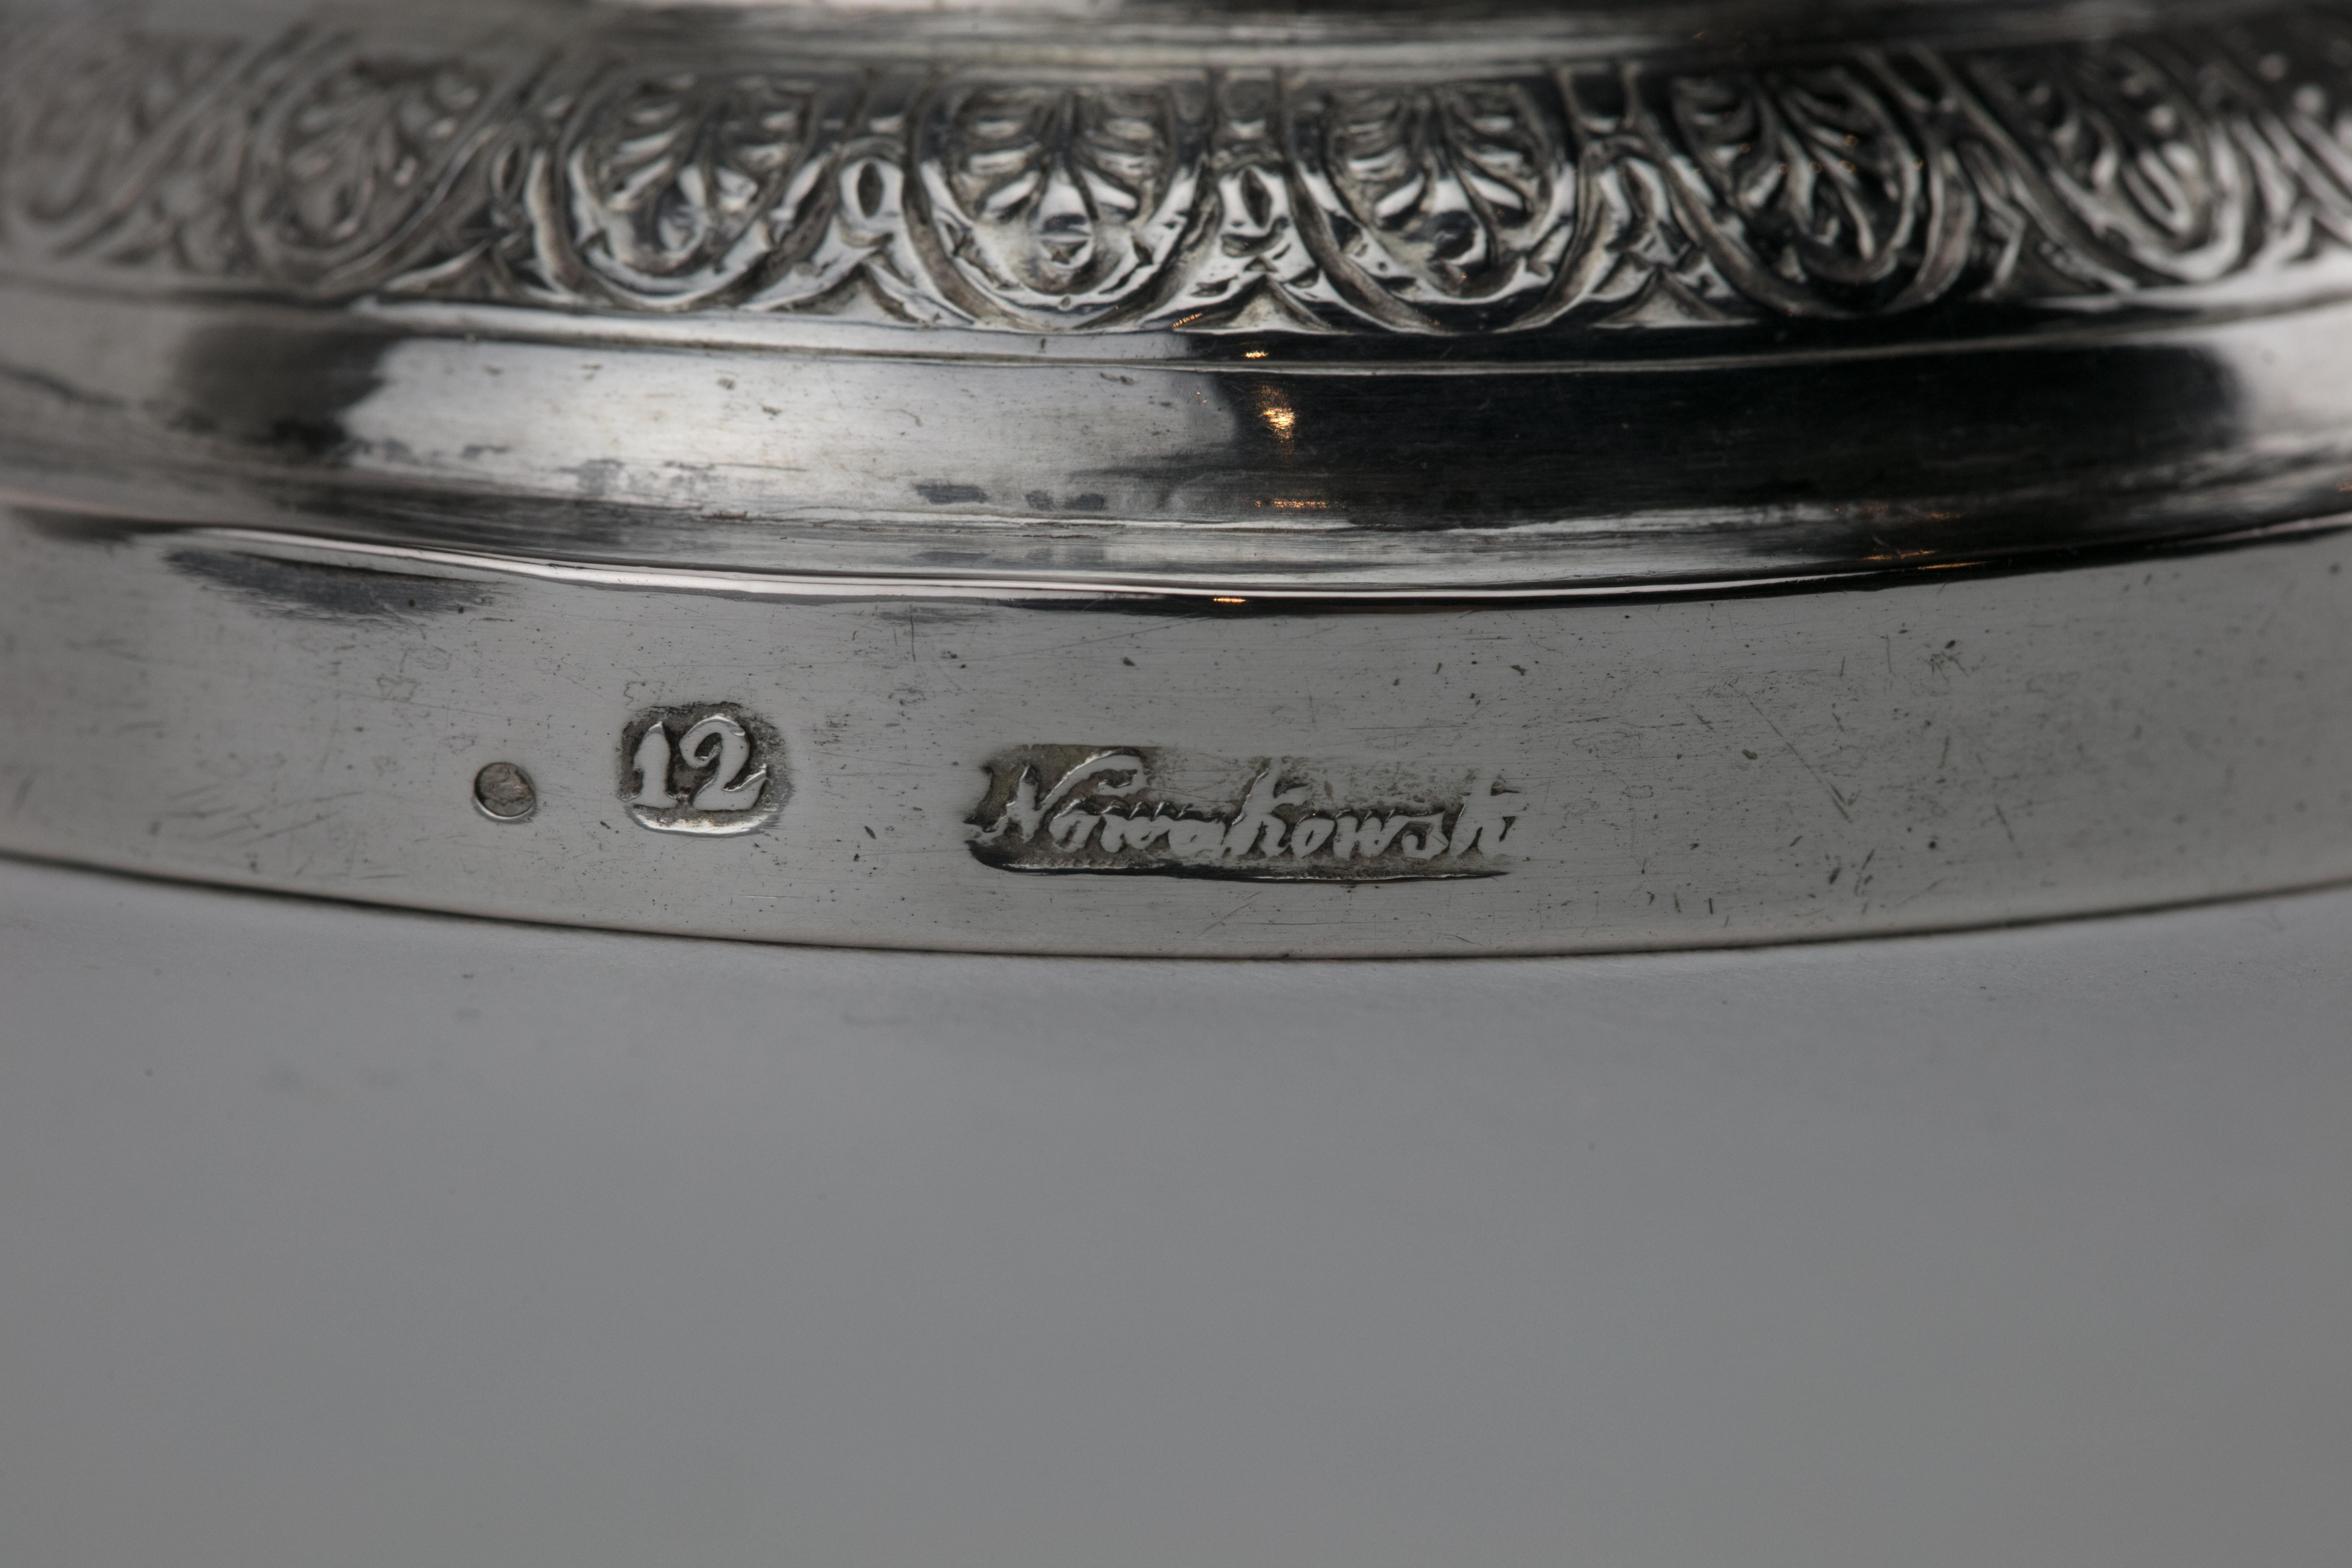 Handmade silver Kiddush goblet, Poland, circa 1820.
Large upper portion engraved with curtain decoration, set on a knobbed stem with skirt decoration on a round stylized base. Clearly struck with the quality mark 12 and maker's mark.

Kiddush cup is